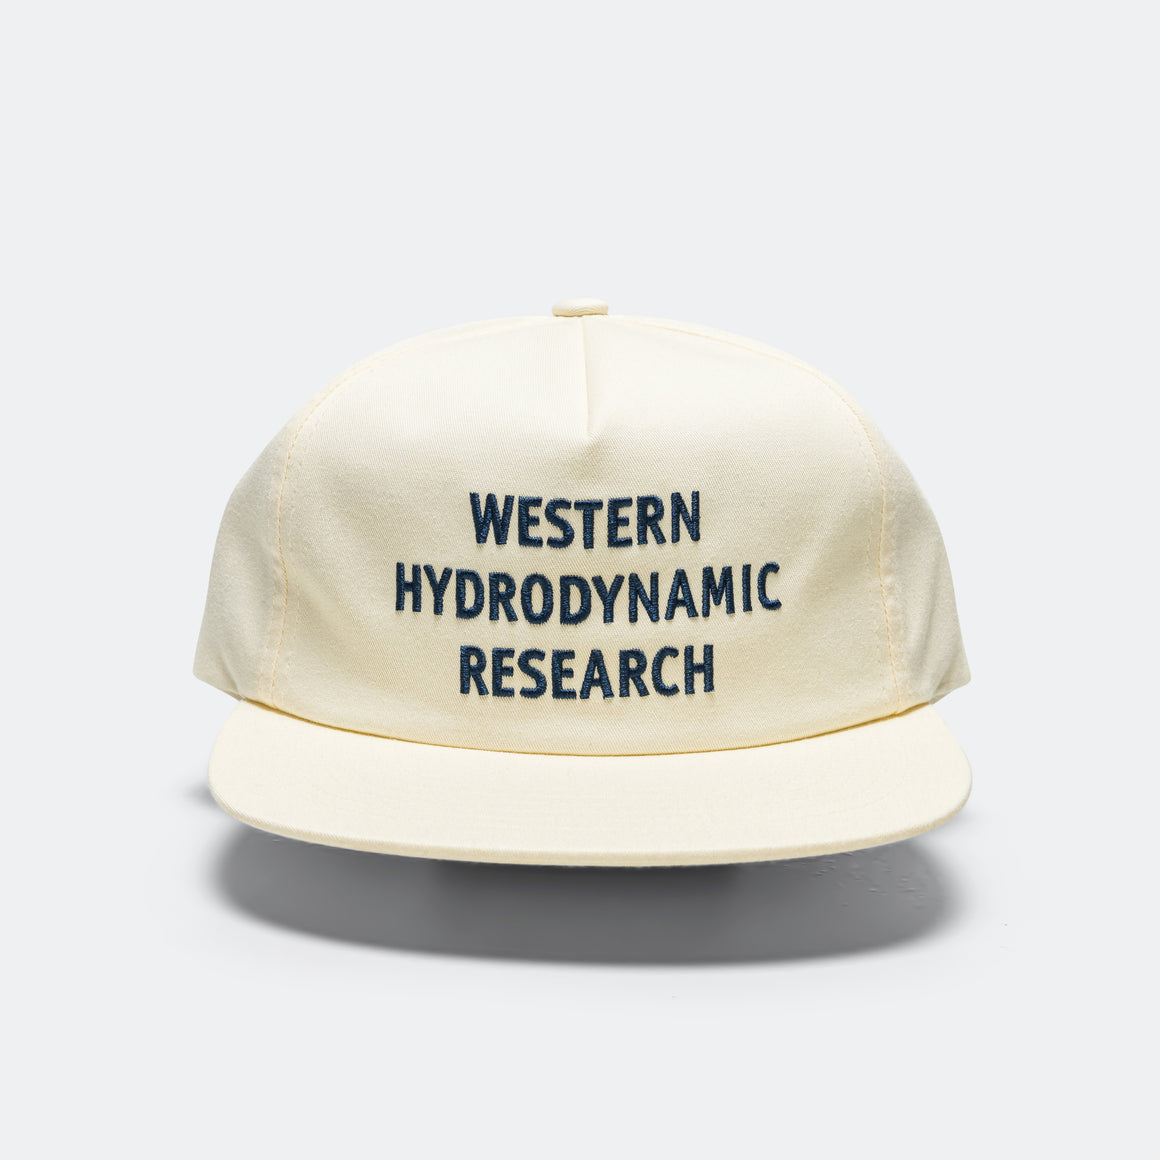 Western Hydrodynamic Research - Promotional Hat - White/Navy - UP THERE